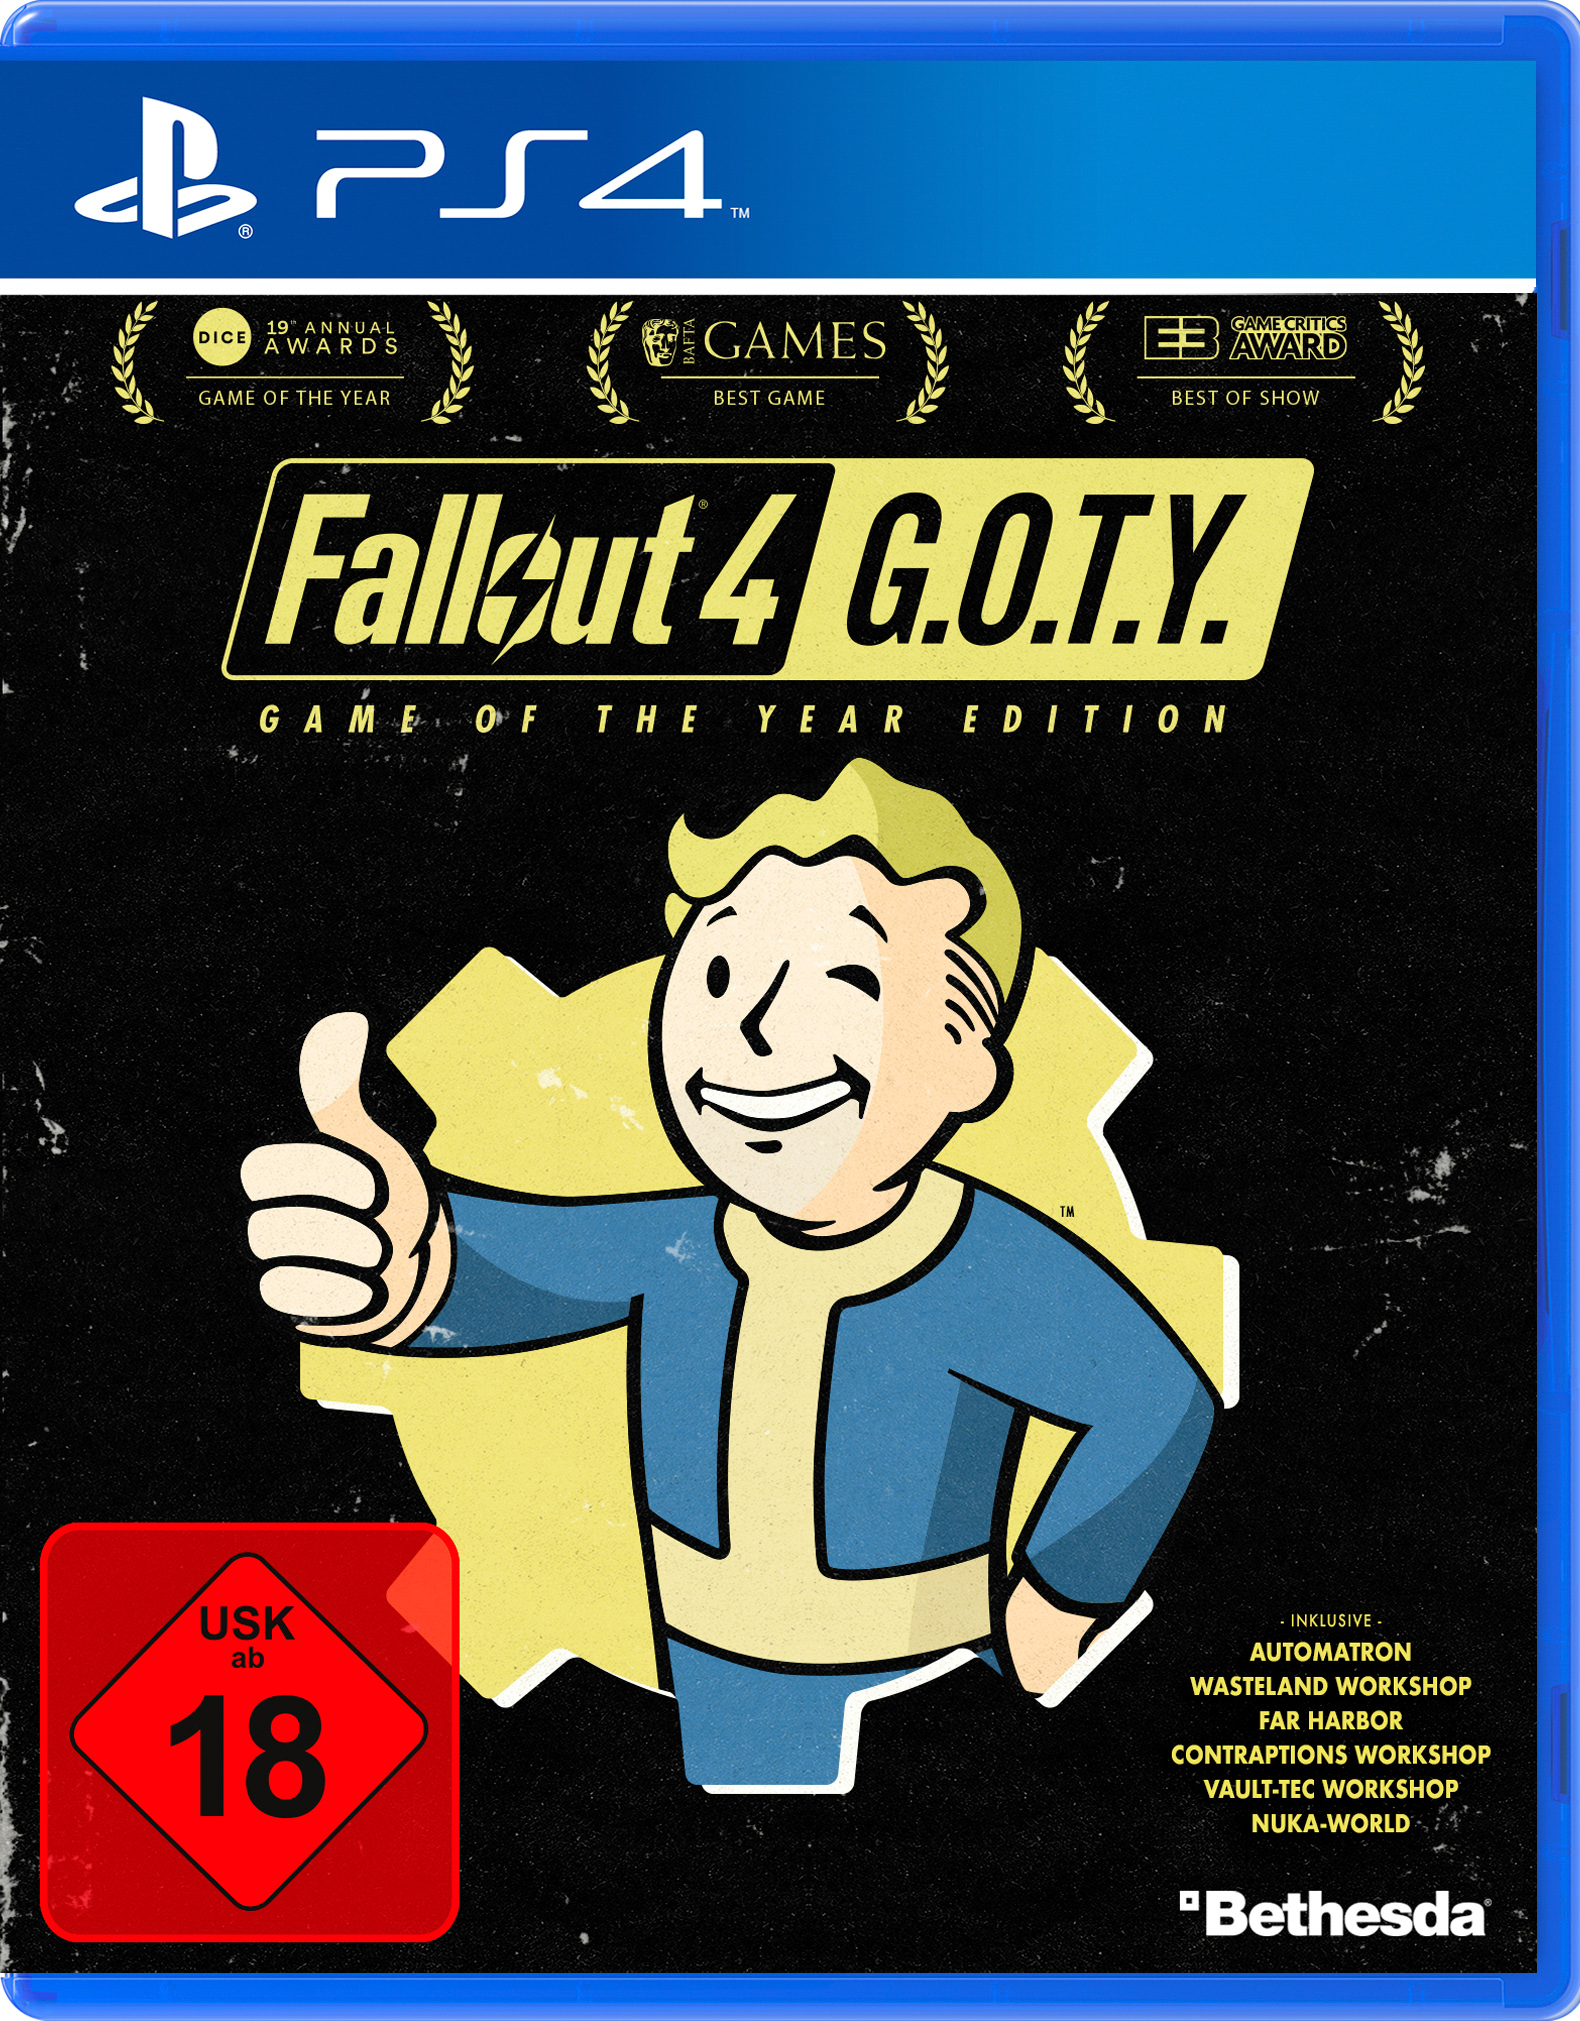 Fallout 4 GOTY-Edition